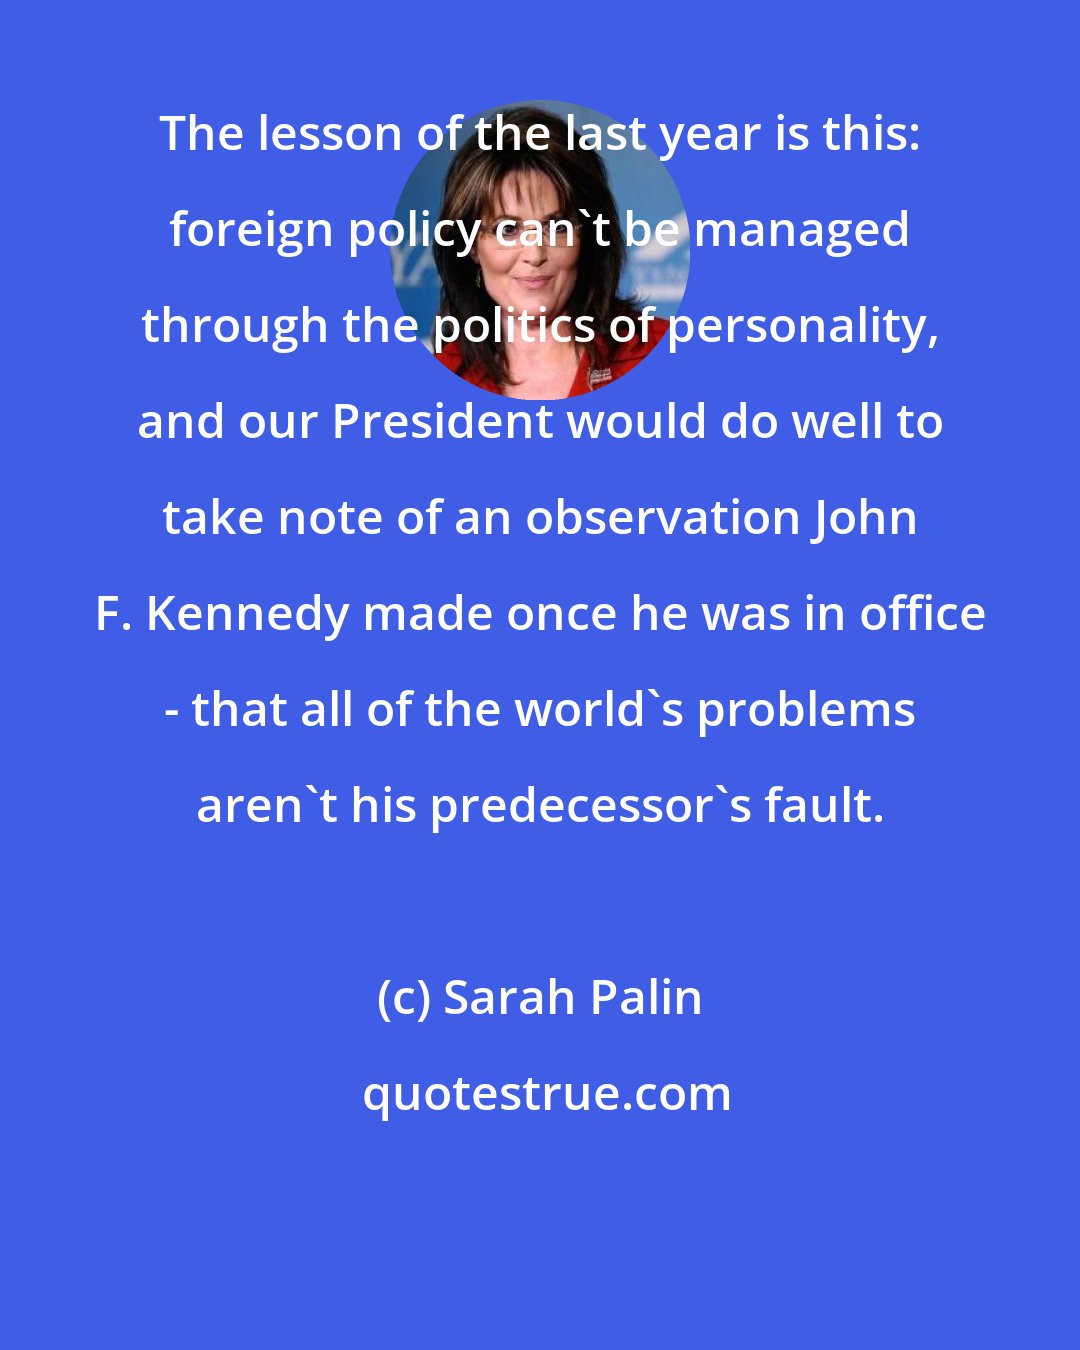 Sarah Palin: The lesson of the last year is this: foreign policy can't be managed through the politics of personality, and our President would do well to take note of an observation John F. Kennedy made once he was in office - that all of the world's problems aren't his predecessor's fault.